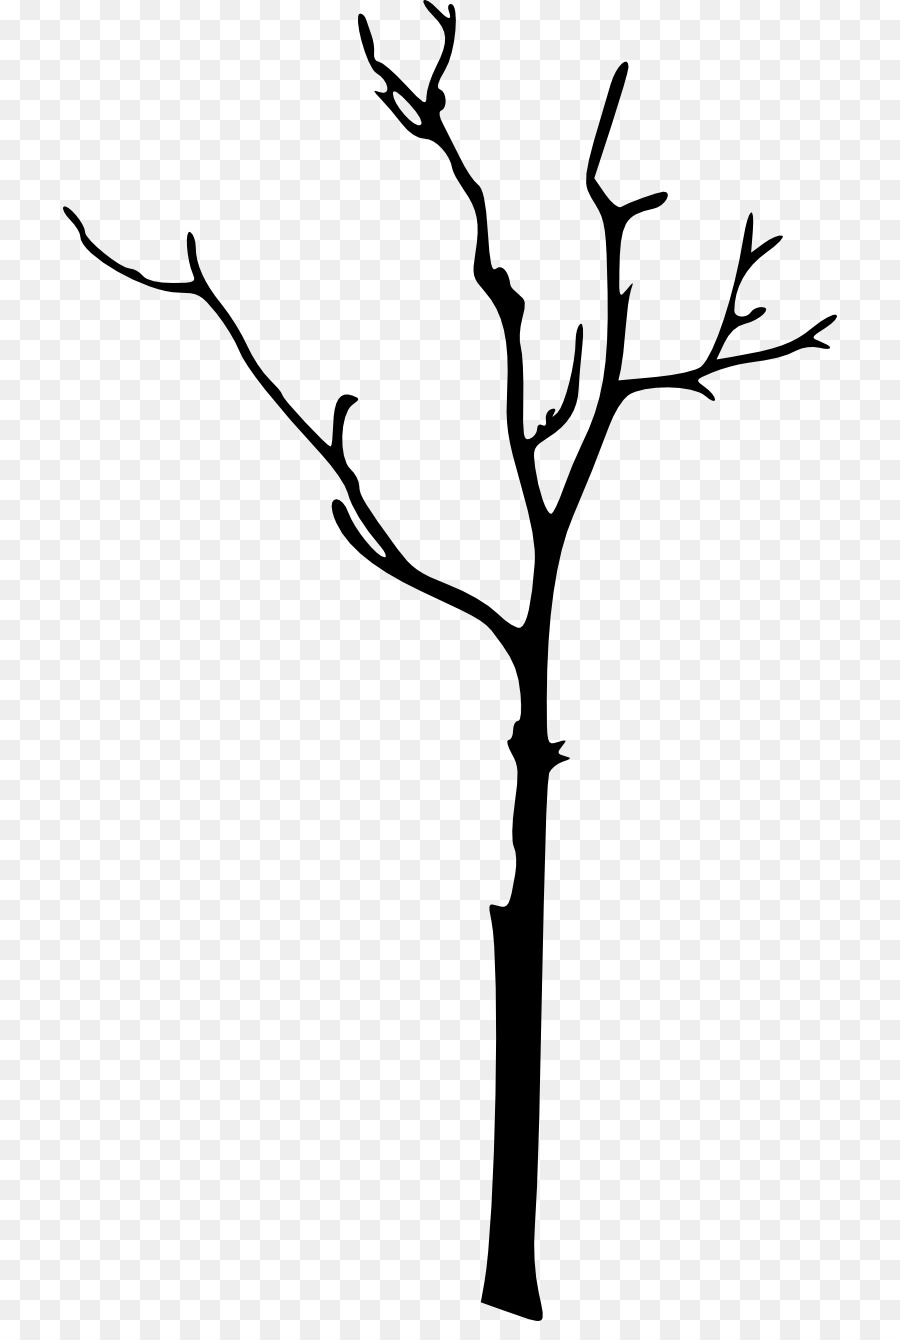 Silhouette Twig Clip art - Silhouette png download - 774*1321 - Free Transparent Silhouette png Download.